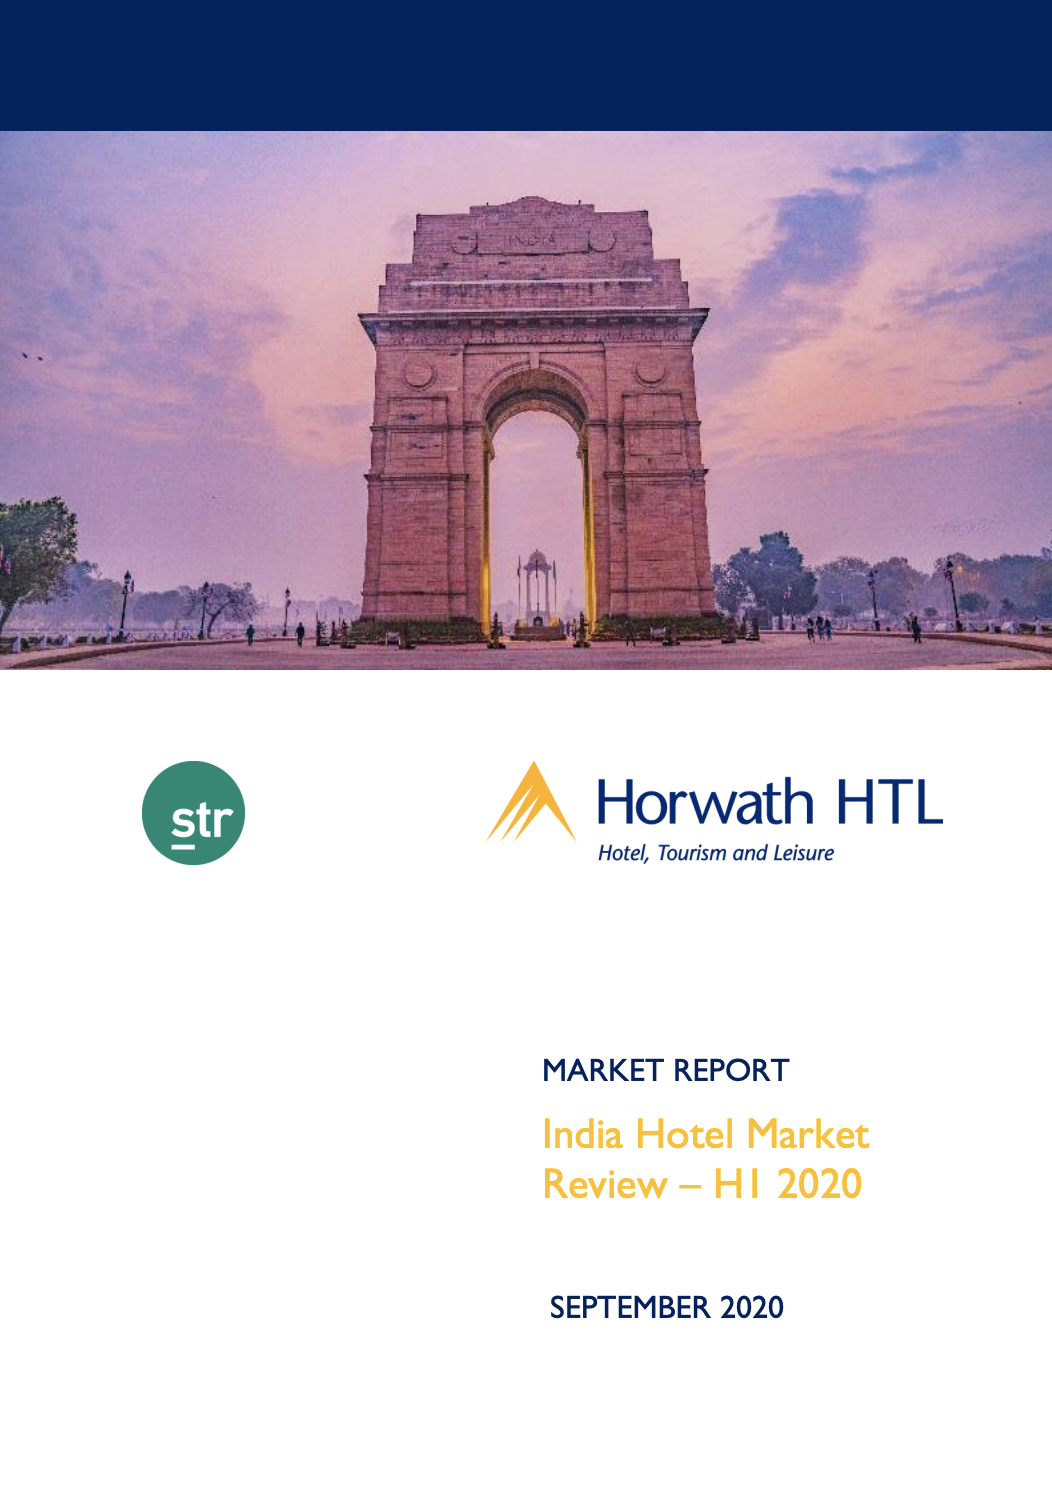 India Hotel Market Review: H1 2020